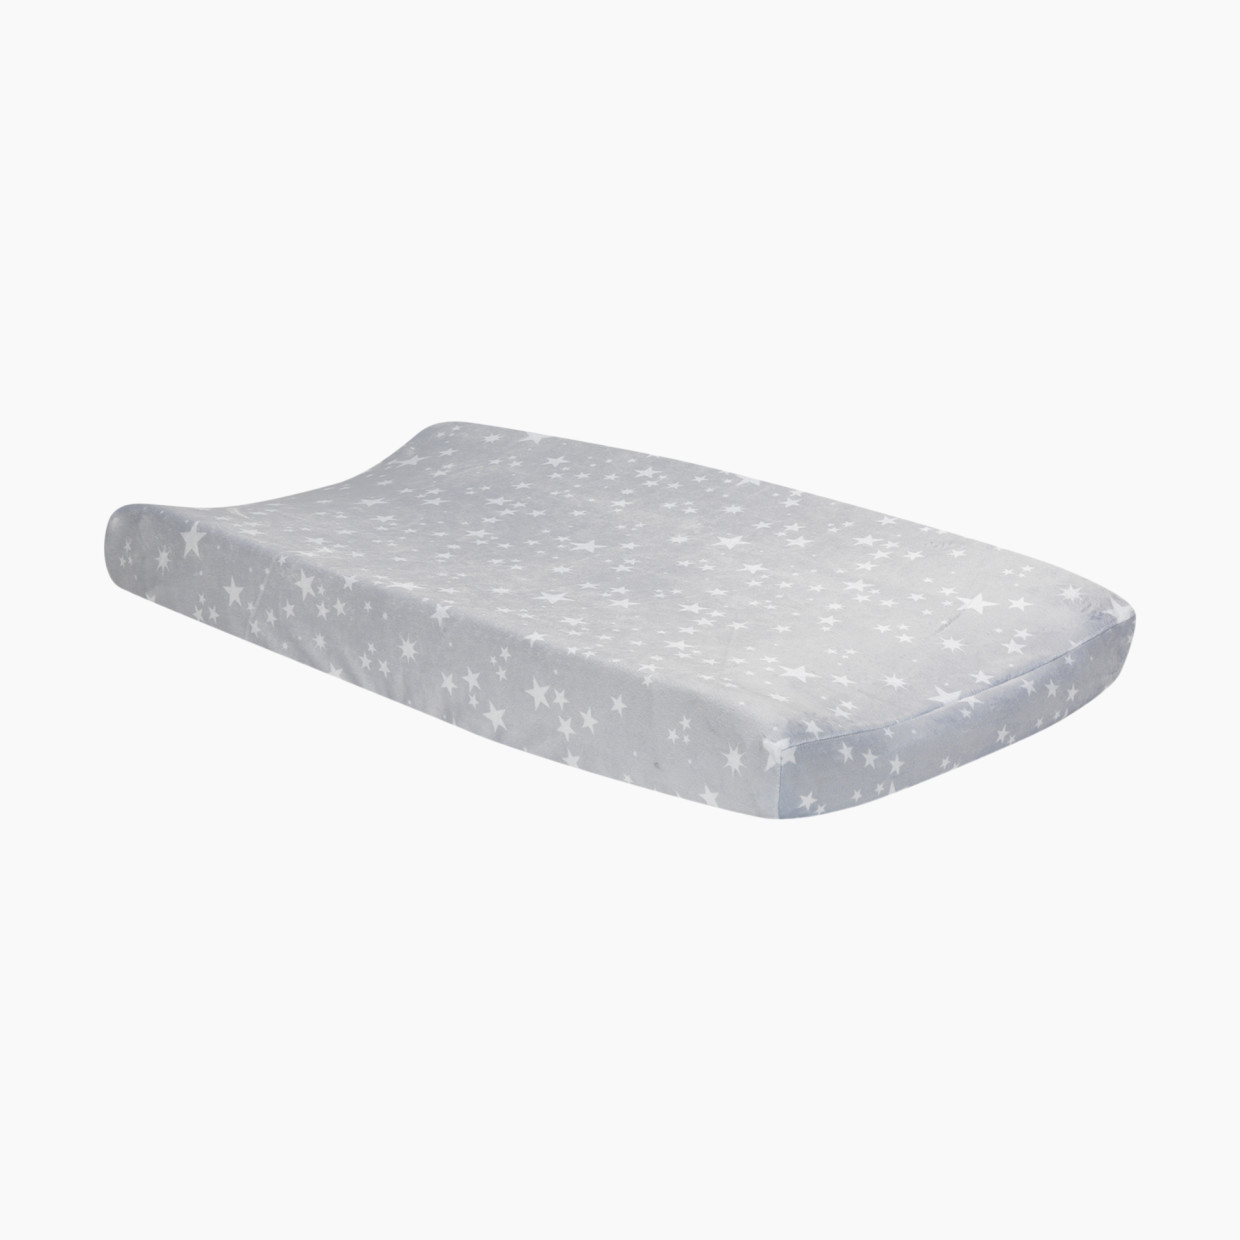 Lambs & Ivy Changing Pad Cover - Milky Way.